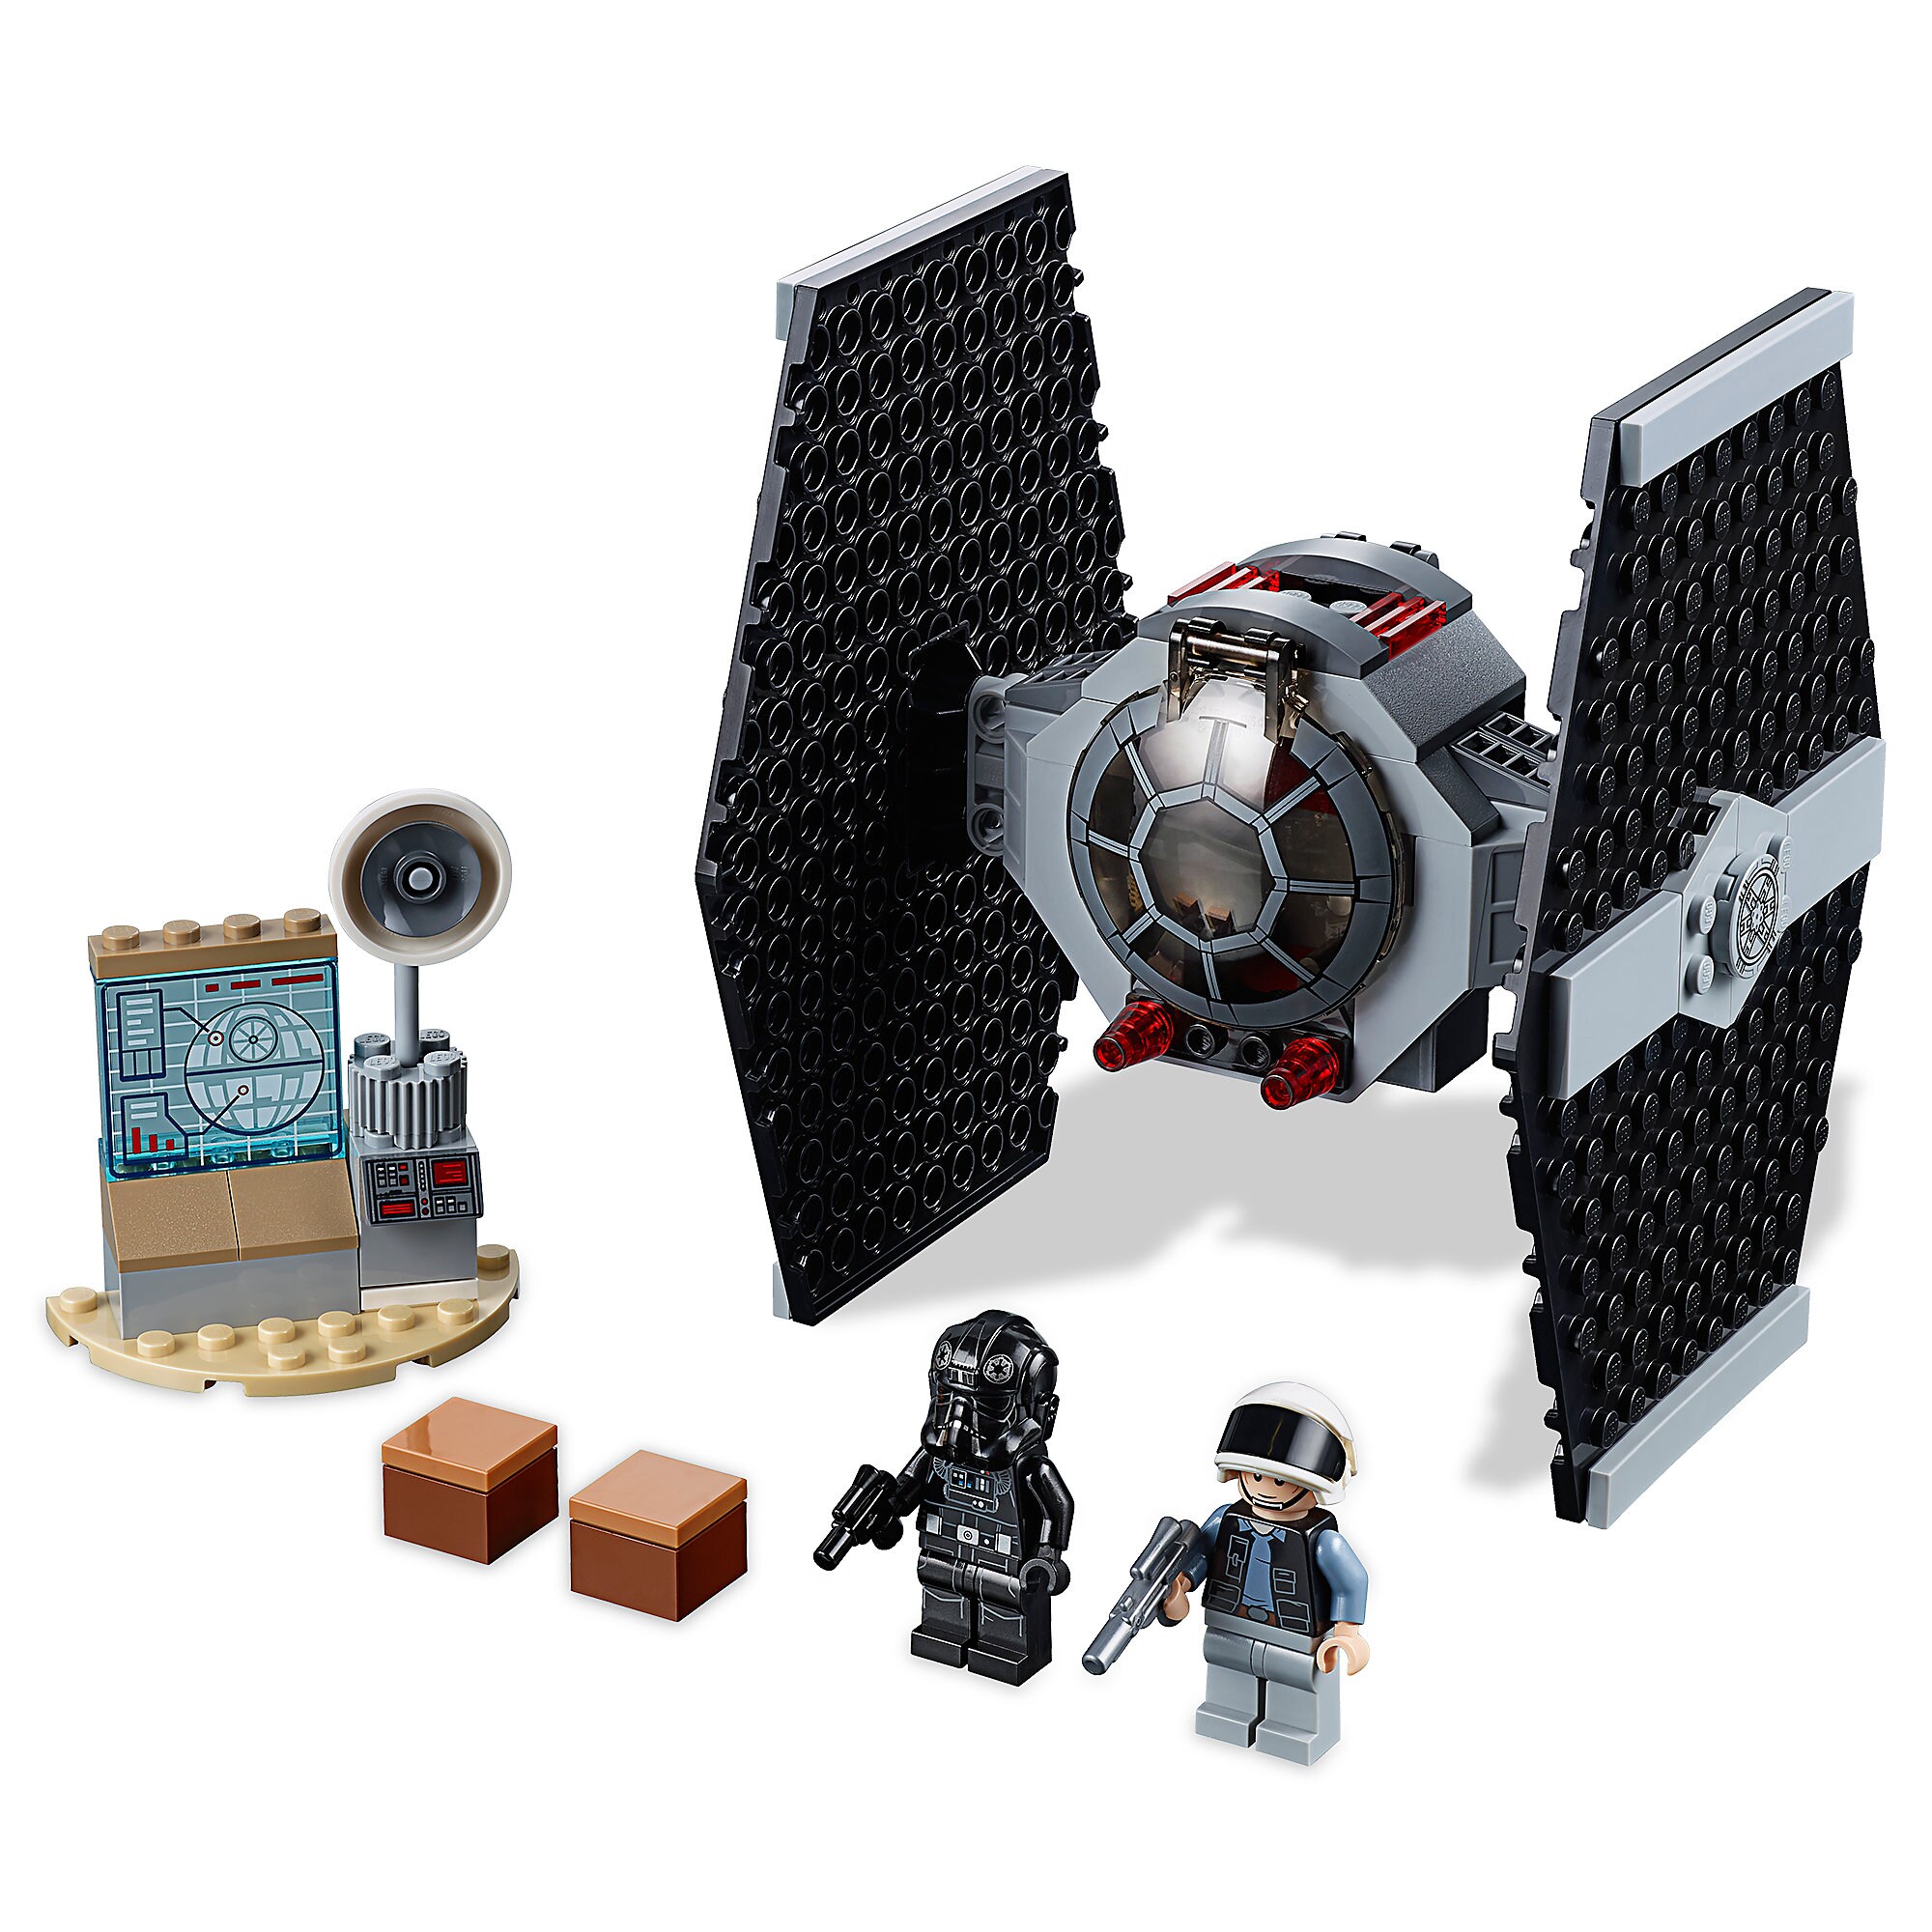 TIE Fighter Attack Playset by LEGO - Star Wars